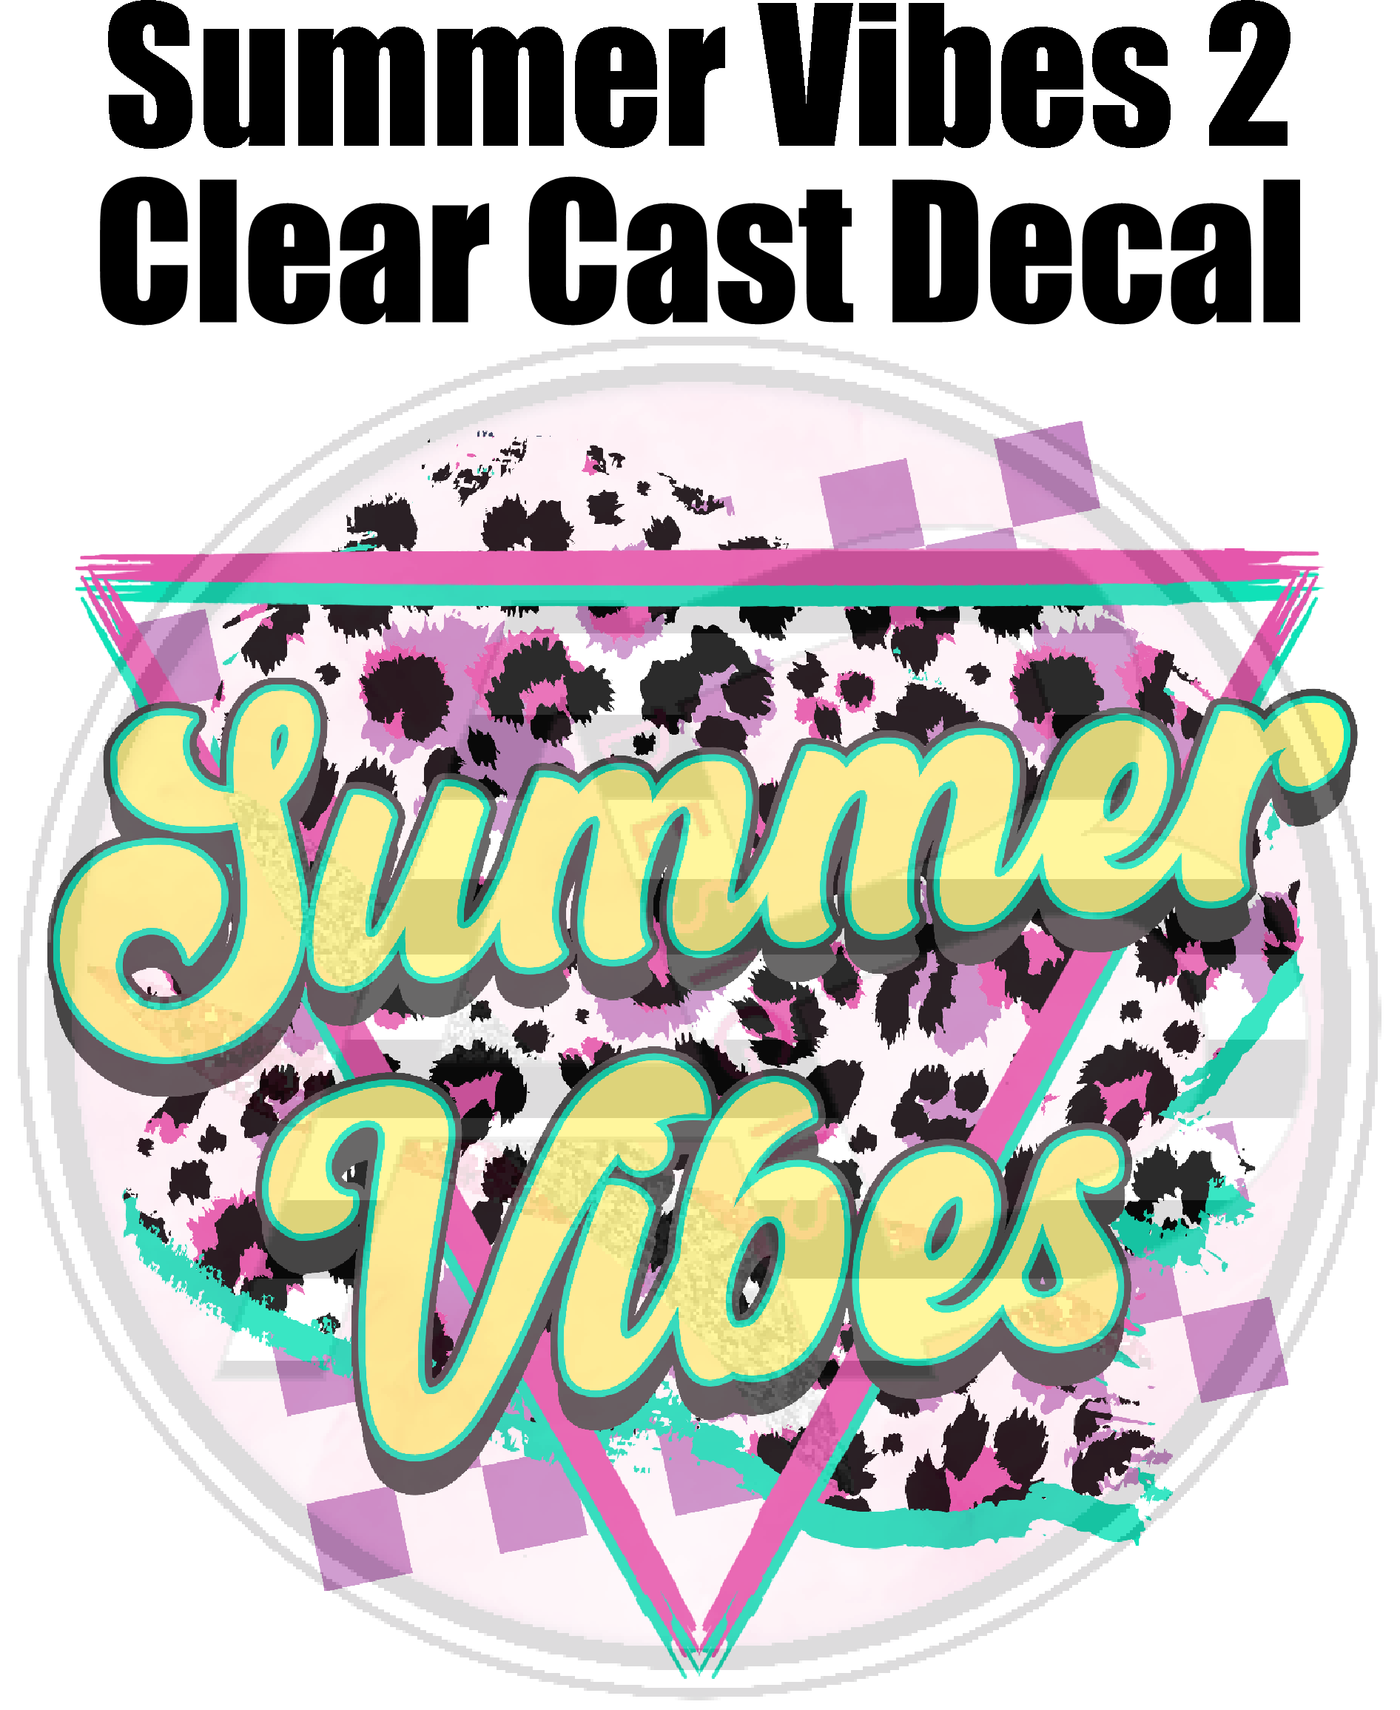 Summer Vibes 2 - Clear Cast Decal